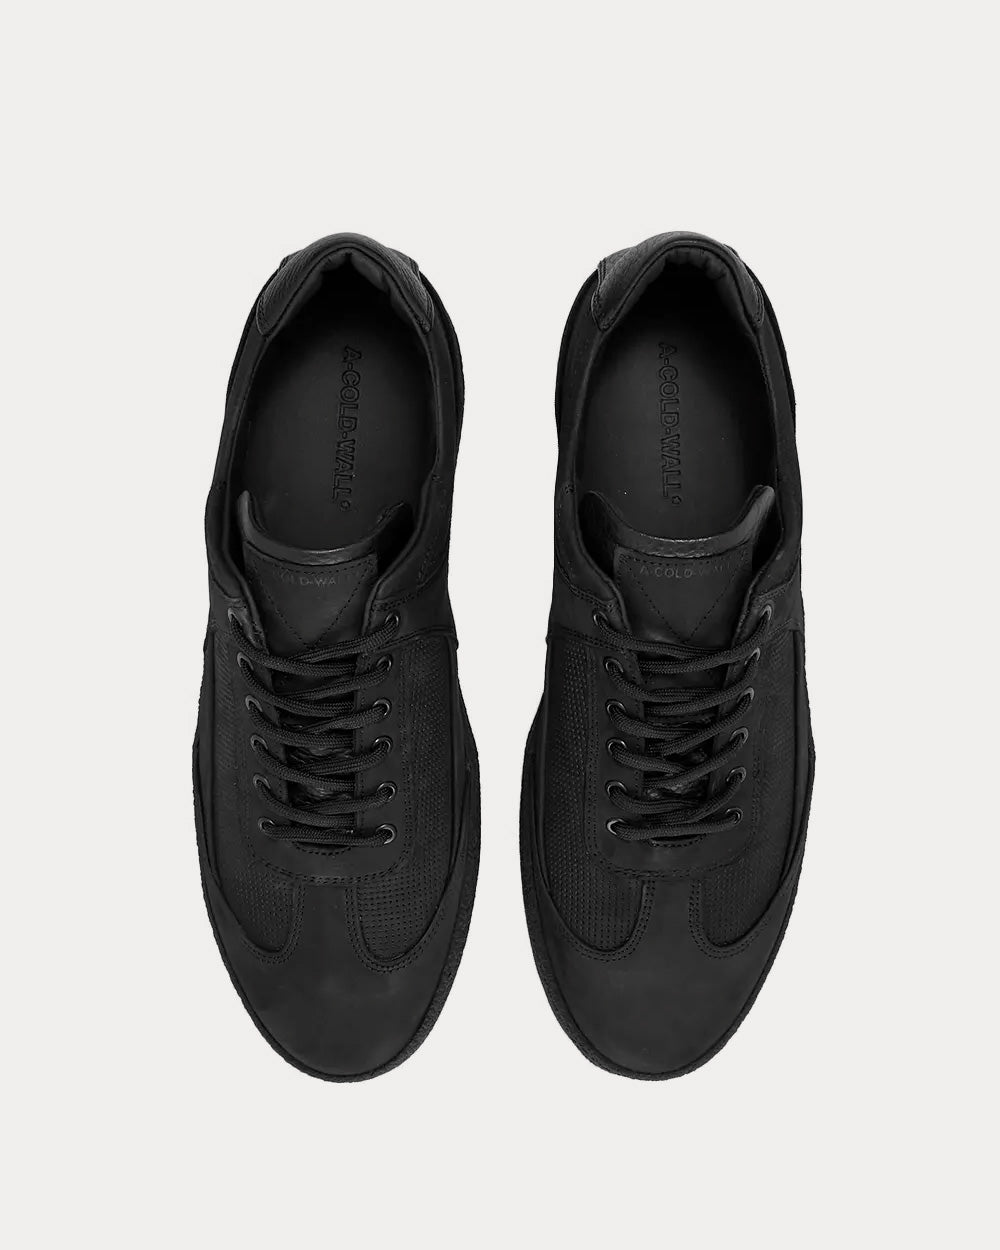 A-COLD-WALL* - Shard Lo Black Low Top Sneakers